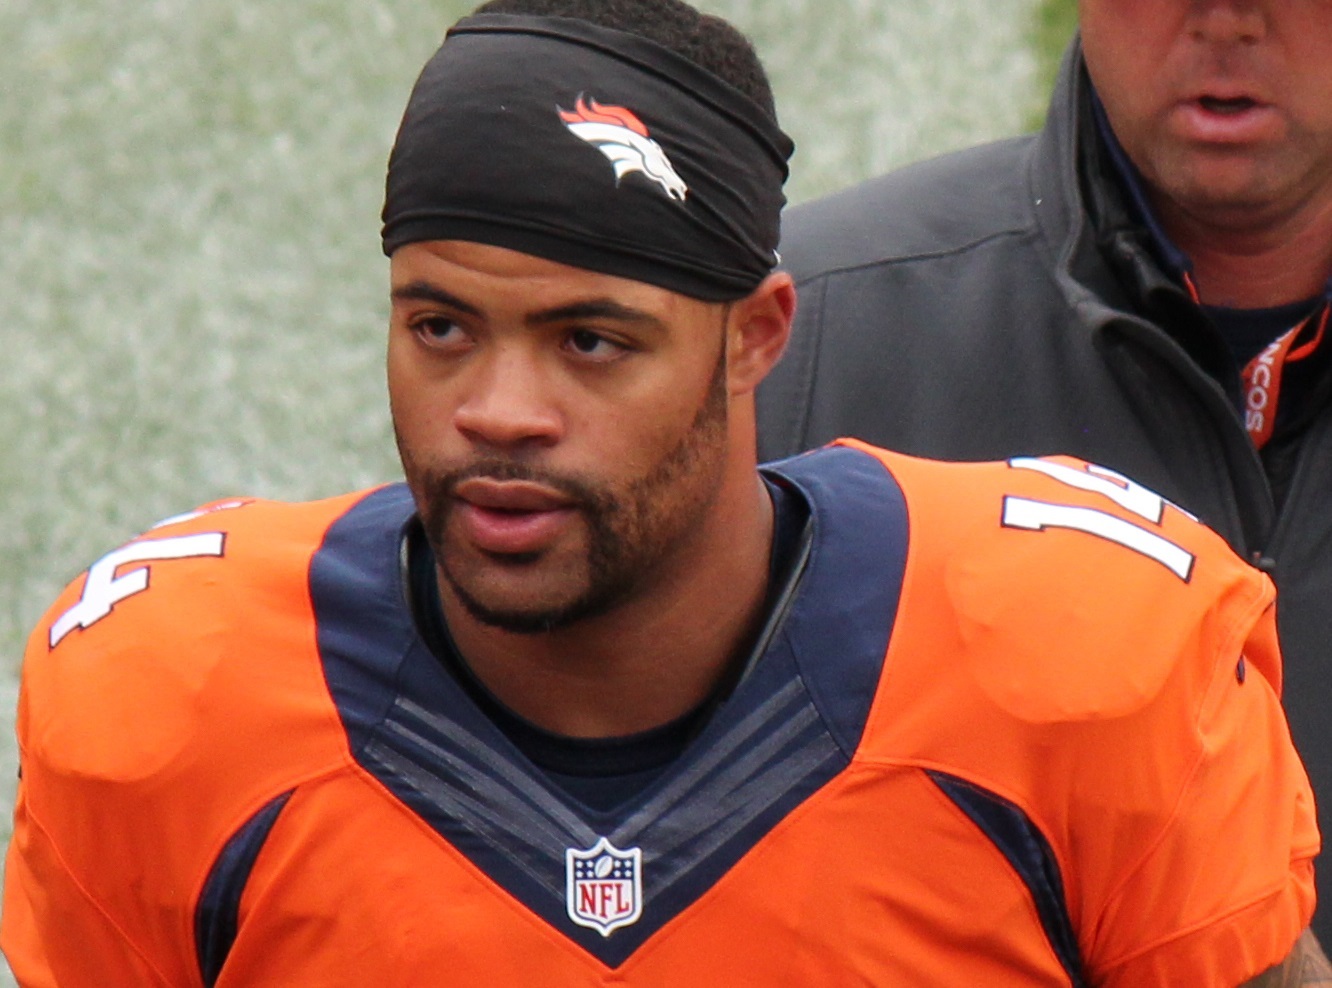 NFL Wide Receiver Cody Latimer Facing Gun Charges After Home Game Goes Awry